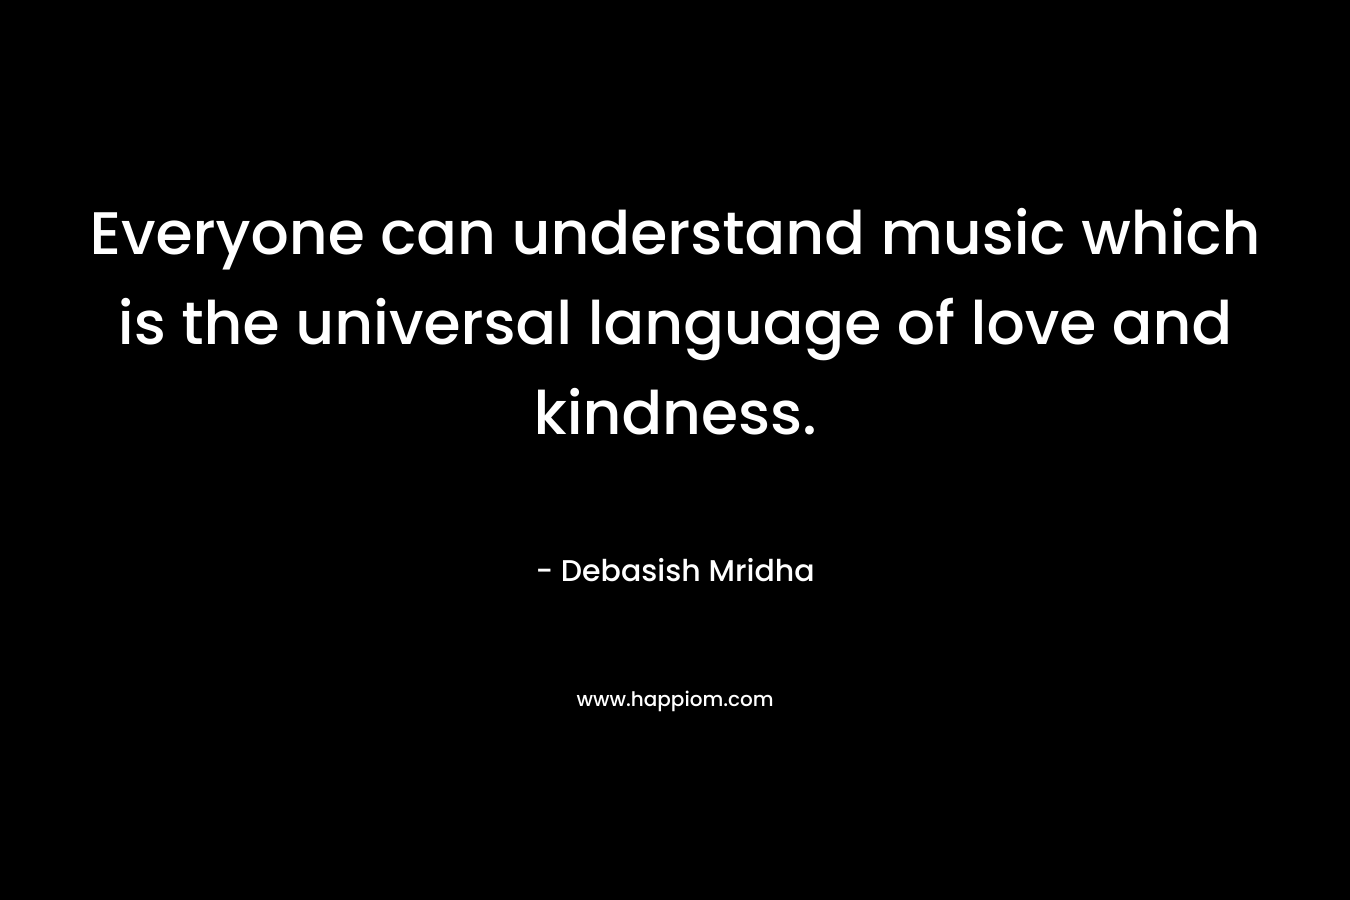 Everyone can understand music which is the universal language of love and kindness.